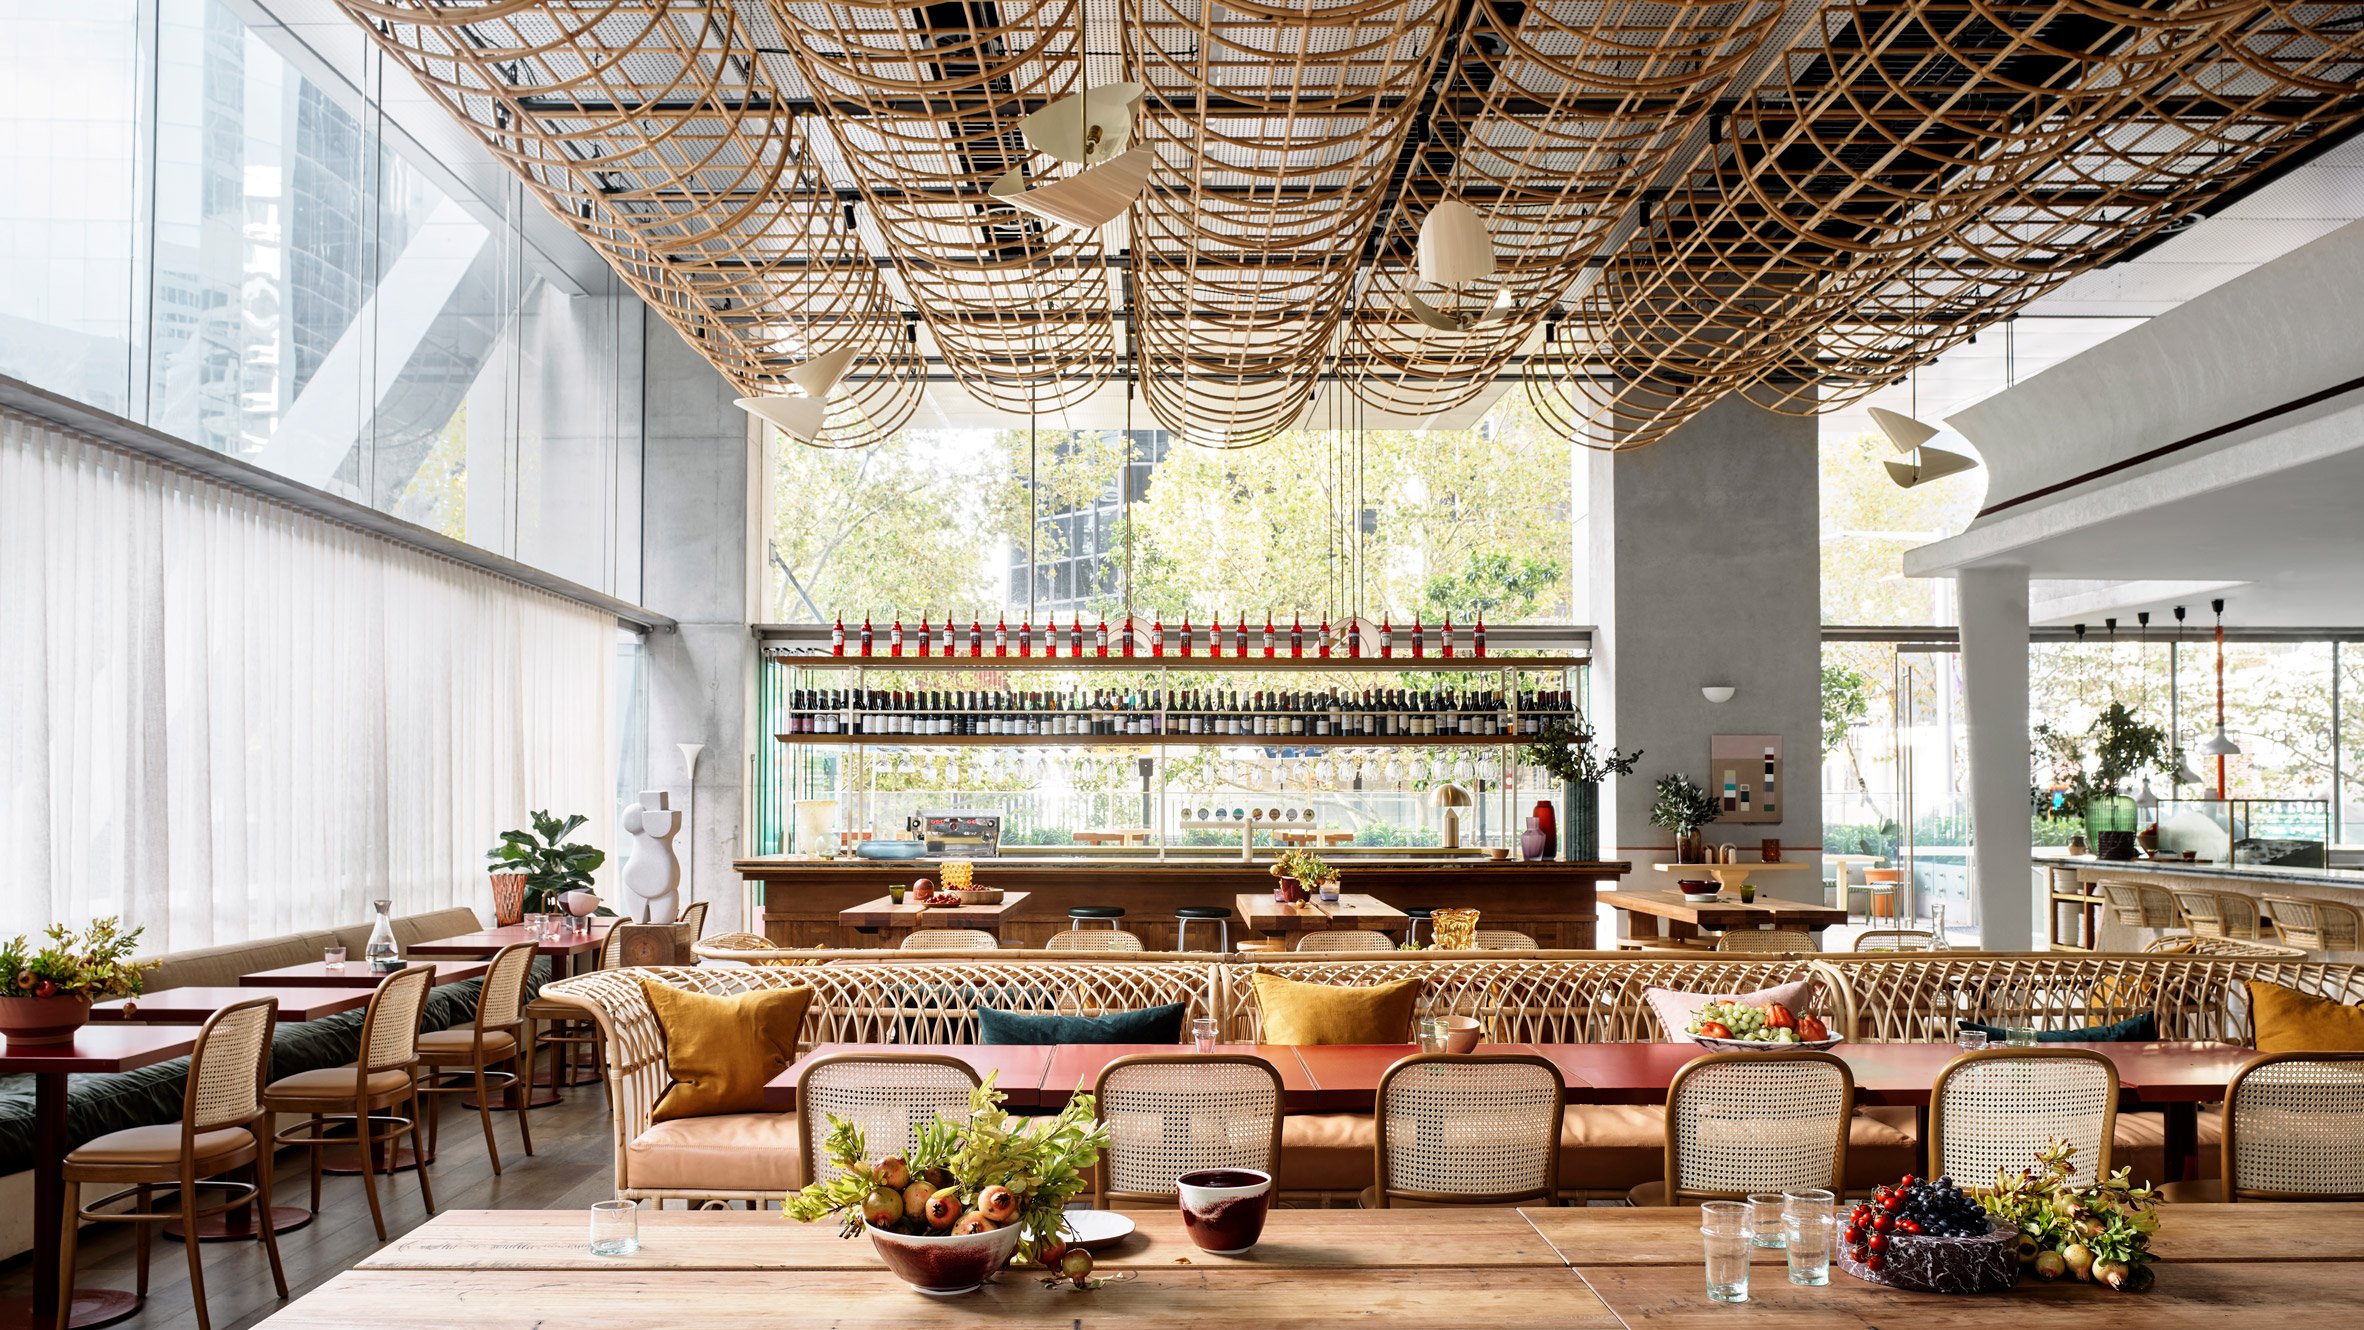 Timber and rattan to Glorietta eatery in